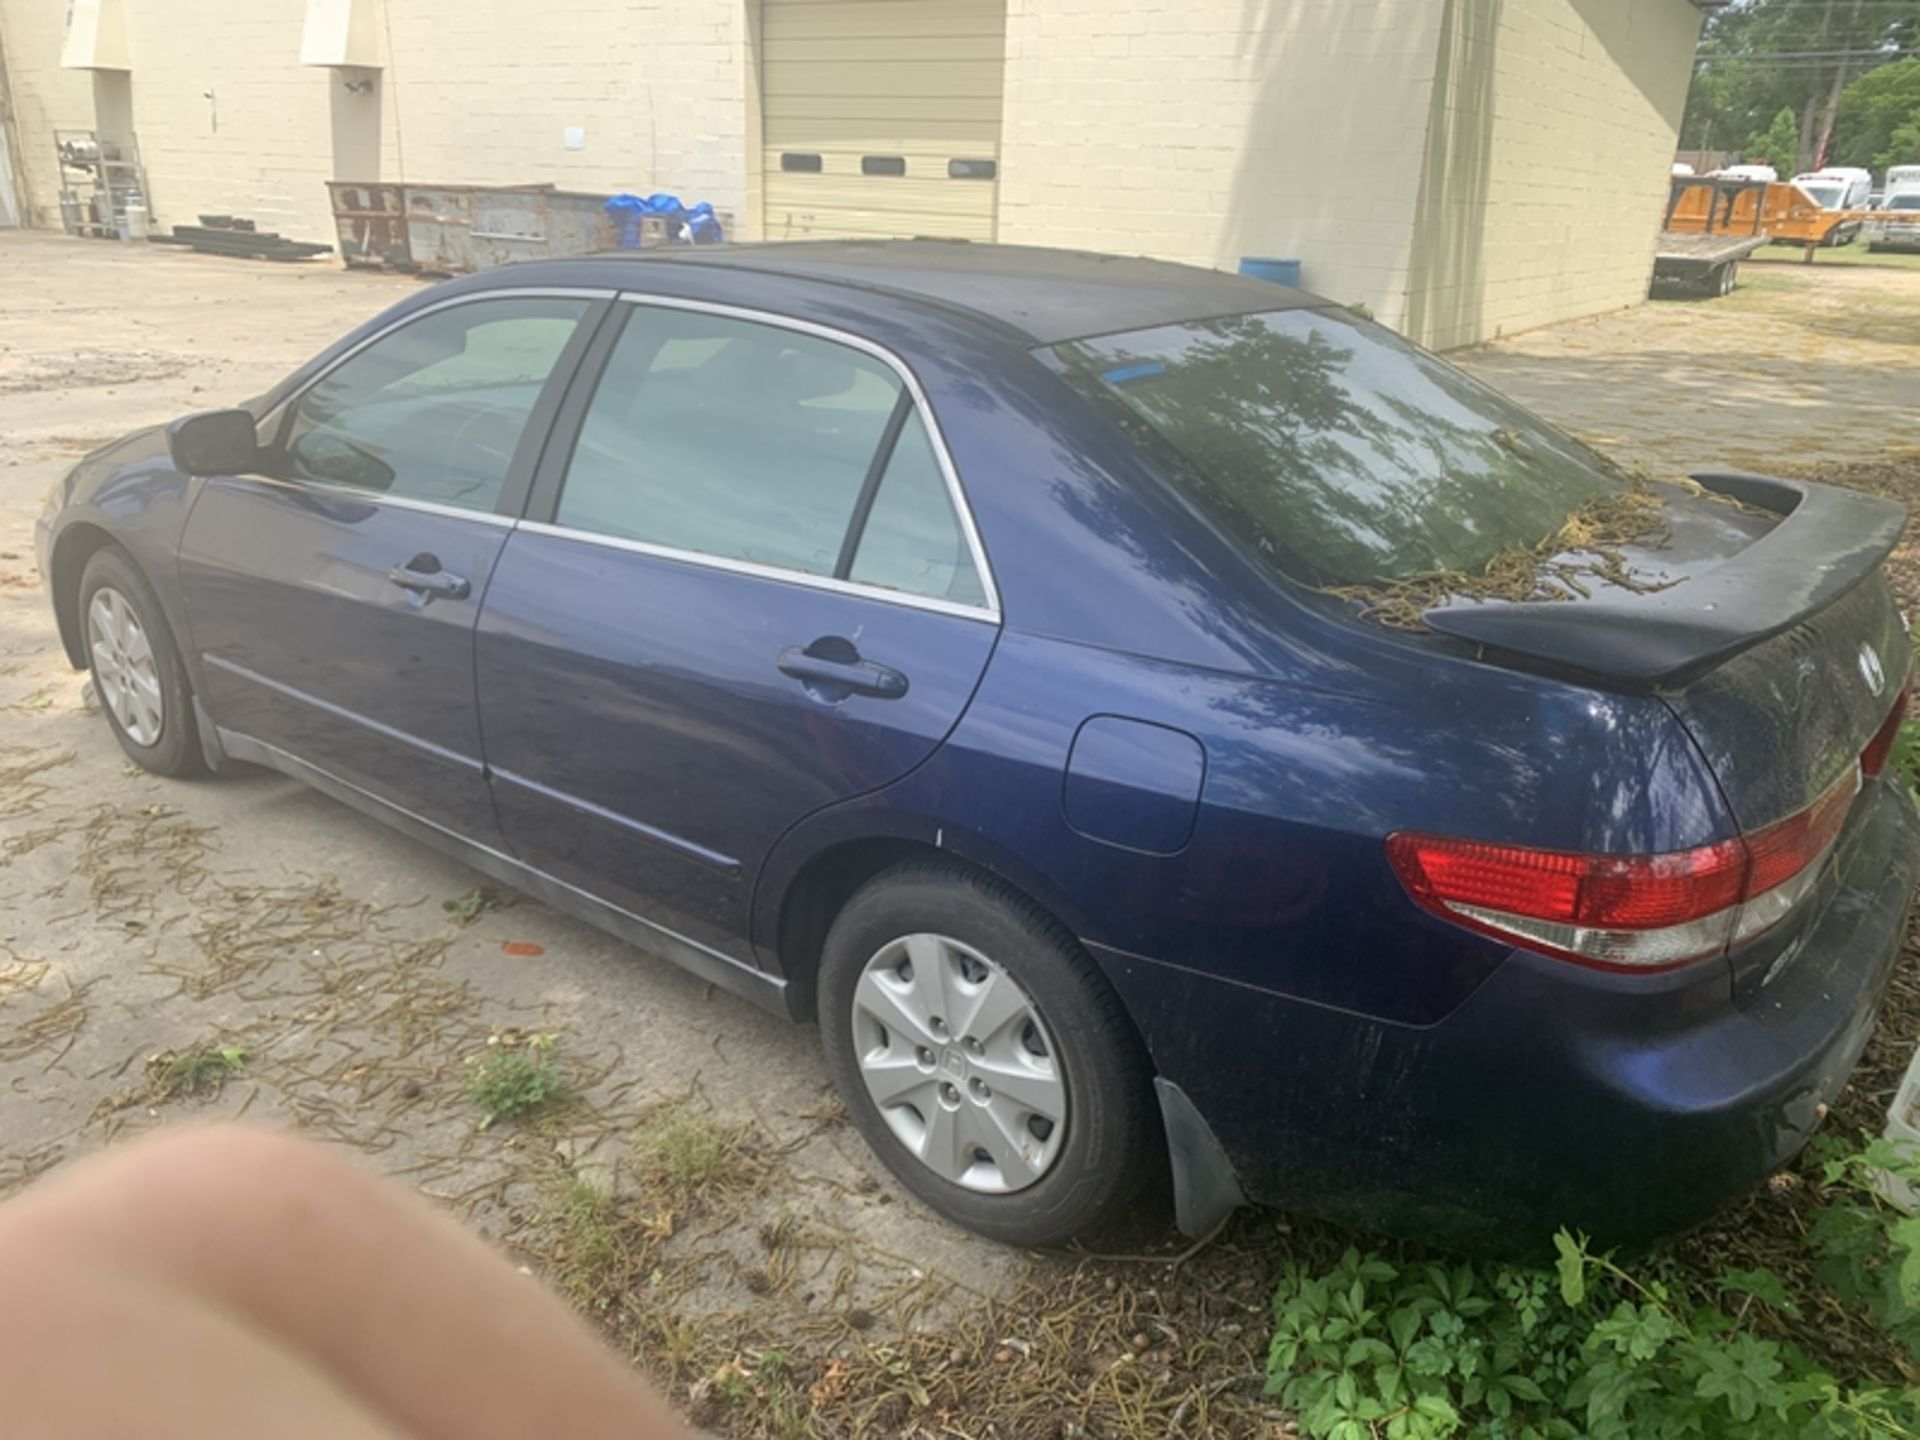 2003 HONDA Accord - 274,715 miles showing - 1HGCM56343A125972 (NOT RUNNING) Vehicle will not - Image 4 of 6